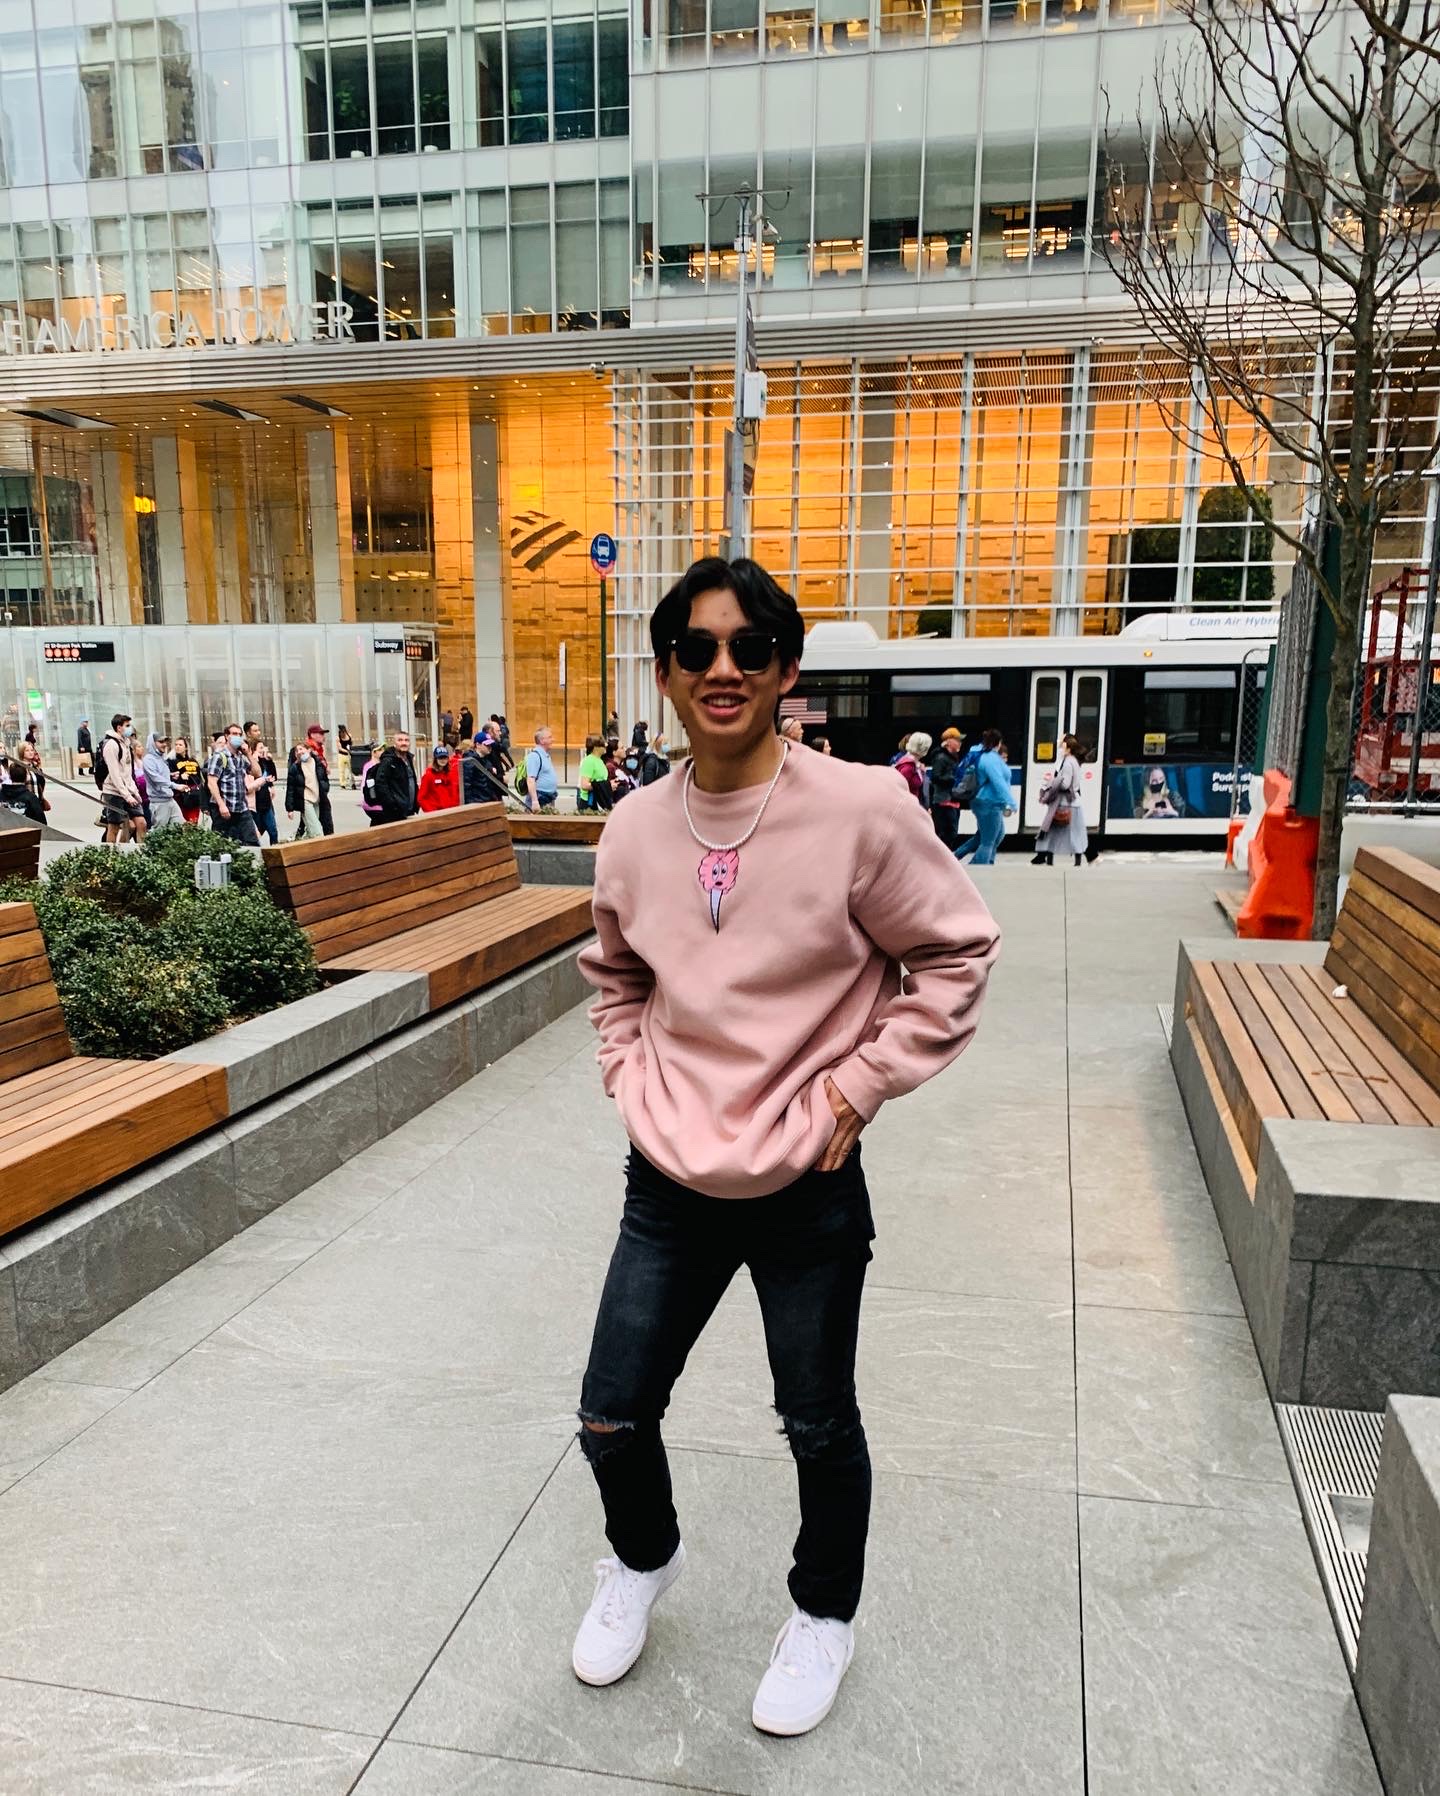 Picture of young male student with a pink sweatshirt, dark jeans, white sneakers and sunglasses on. Student is in the walkway between several benches in a city.